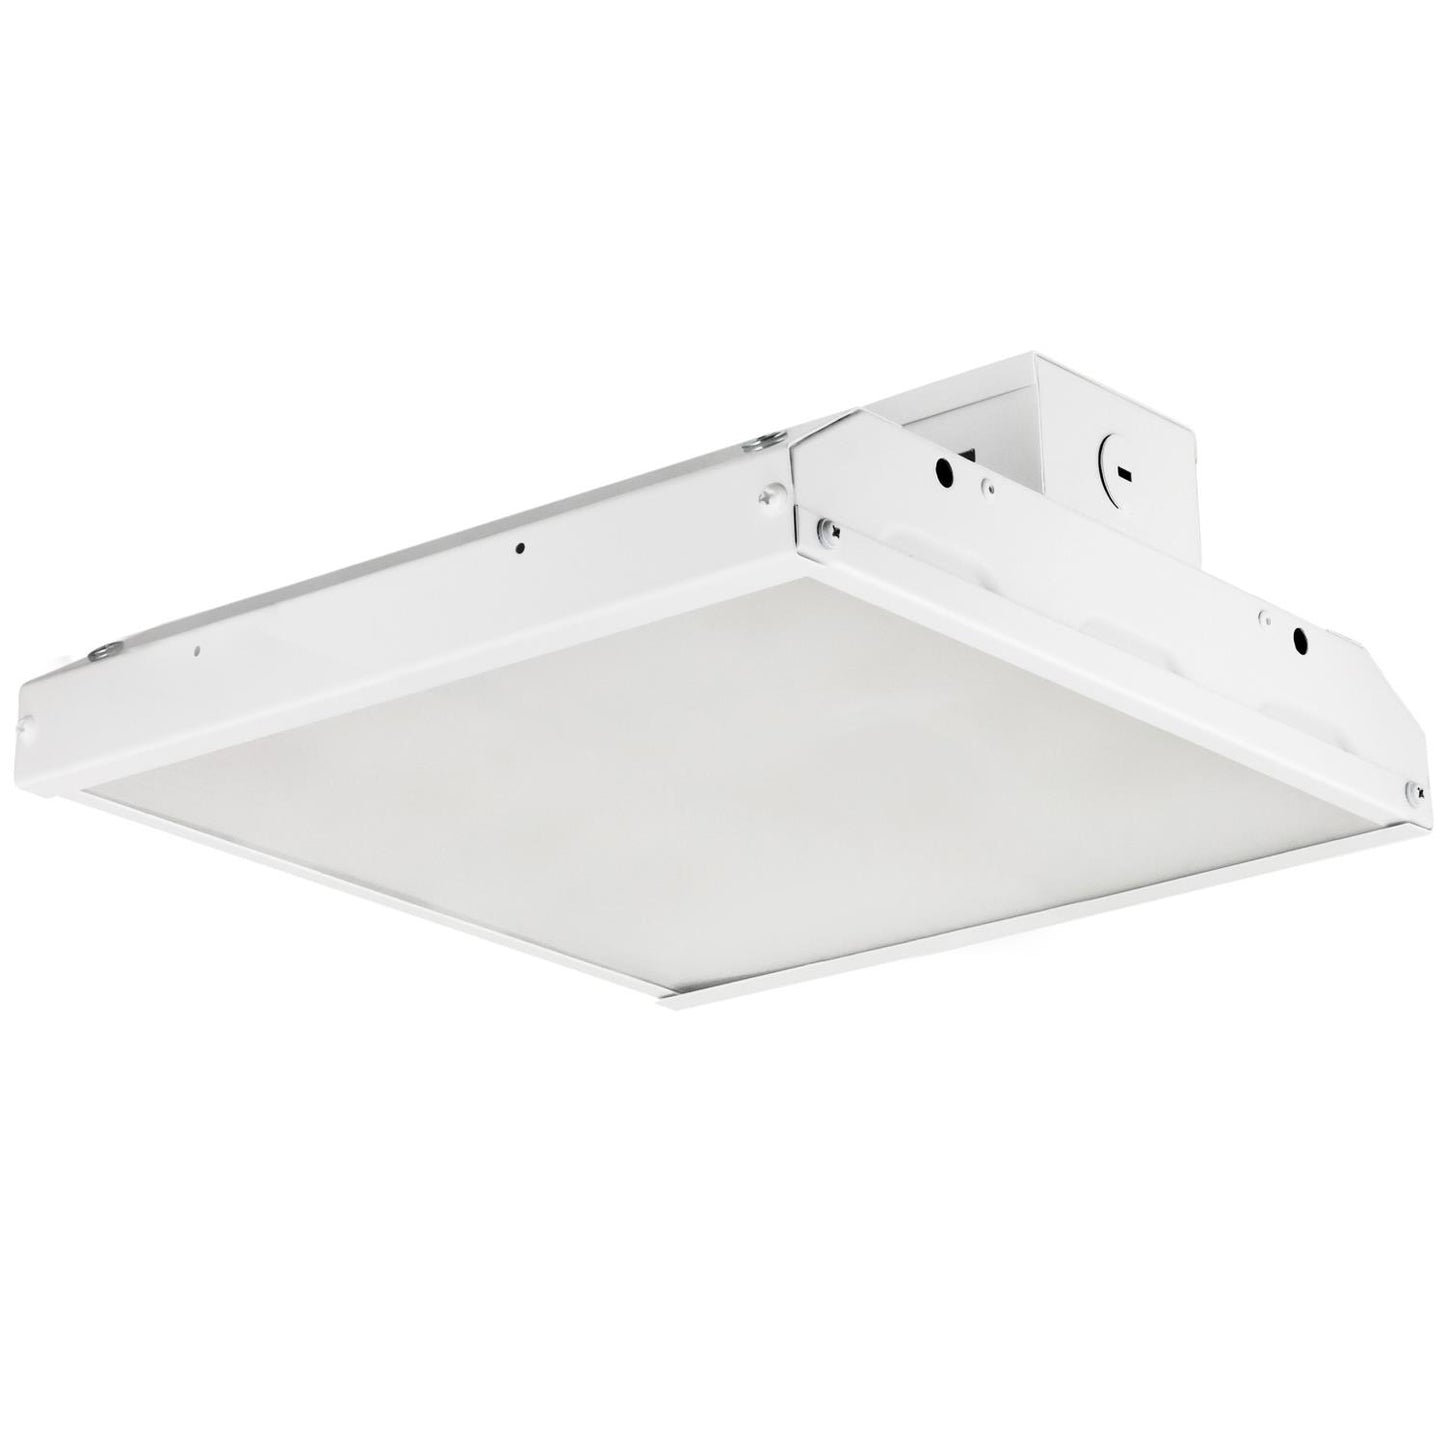 Sunlite 24" LED Linear Commercial High Bay Fixture, 135 Watts, 120/277 Volts, 17,550 Lumen, Dimmable, 5000K Super White, 50,000 Hour Life Span, DLC Listed, UL Listed